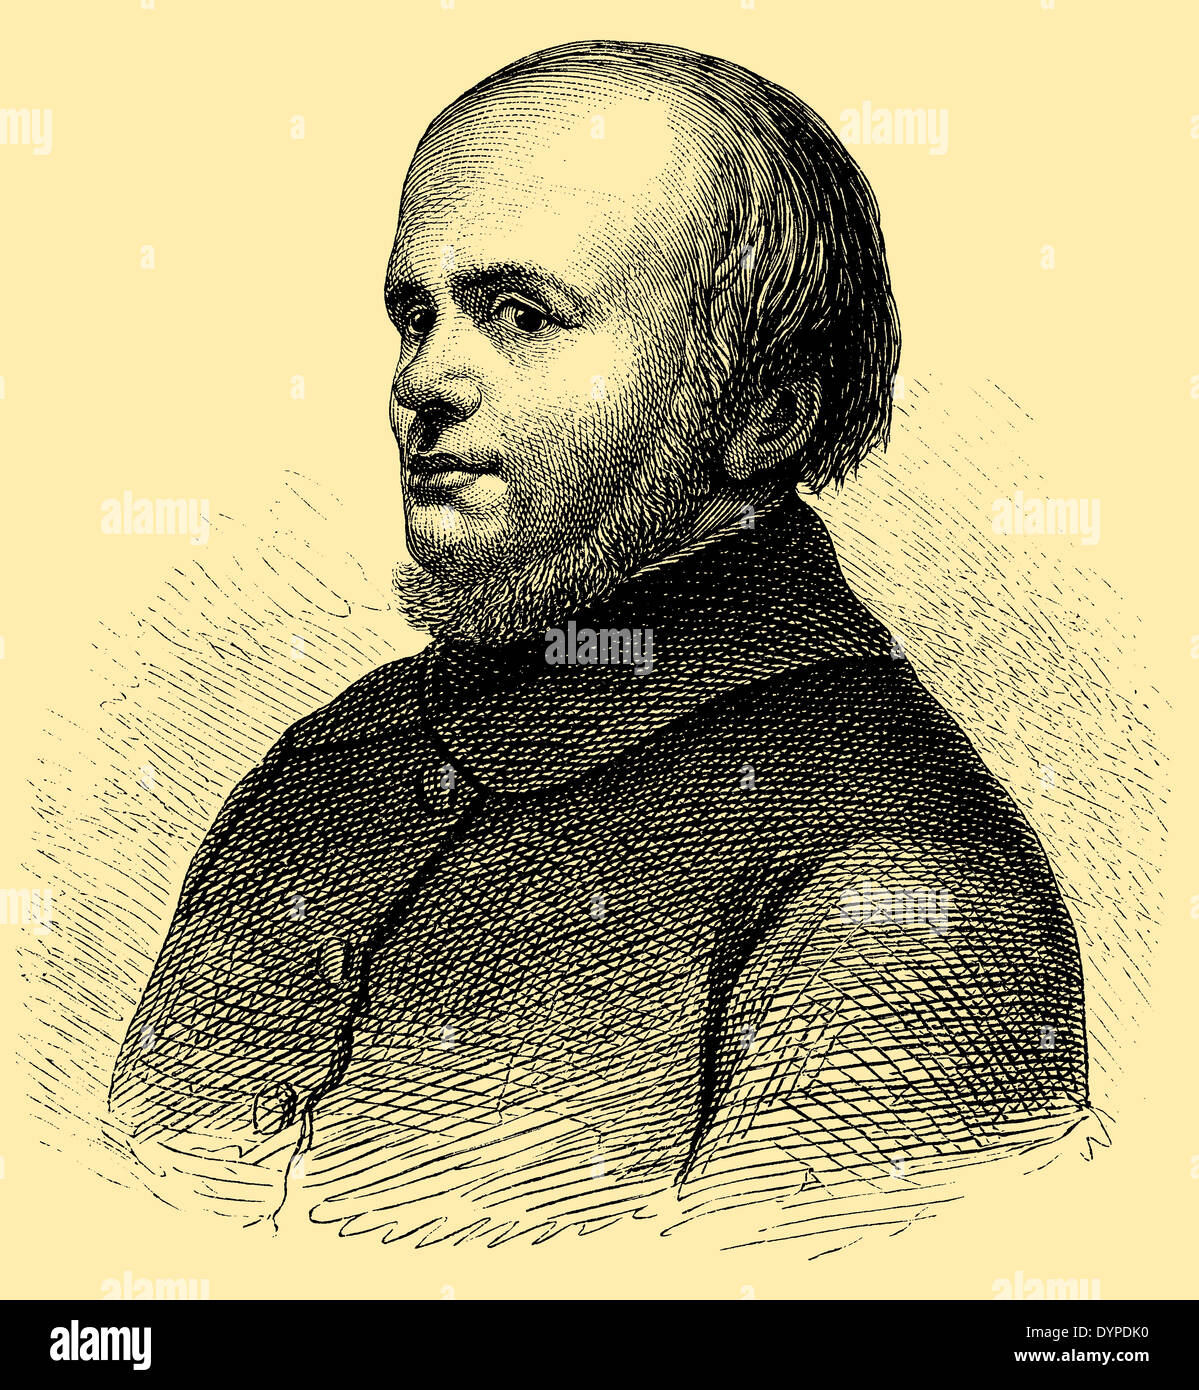 Franz Theodor Kugler (born January 19, 1808, died 18 March 1858) Stock Photo